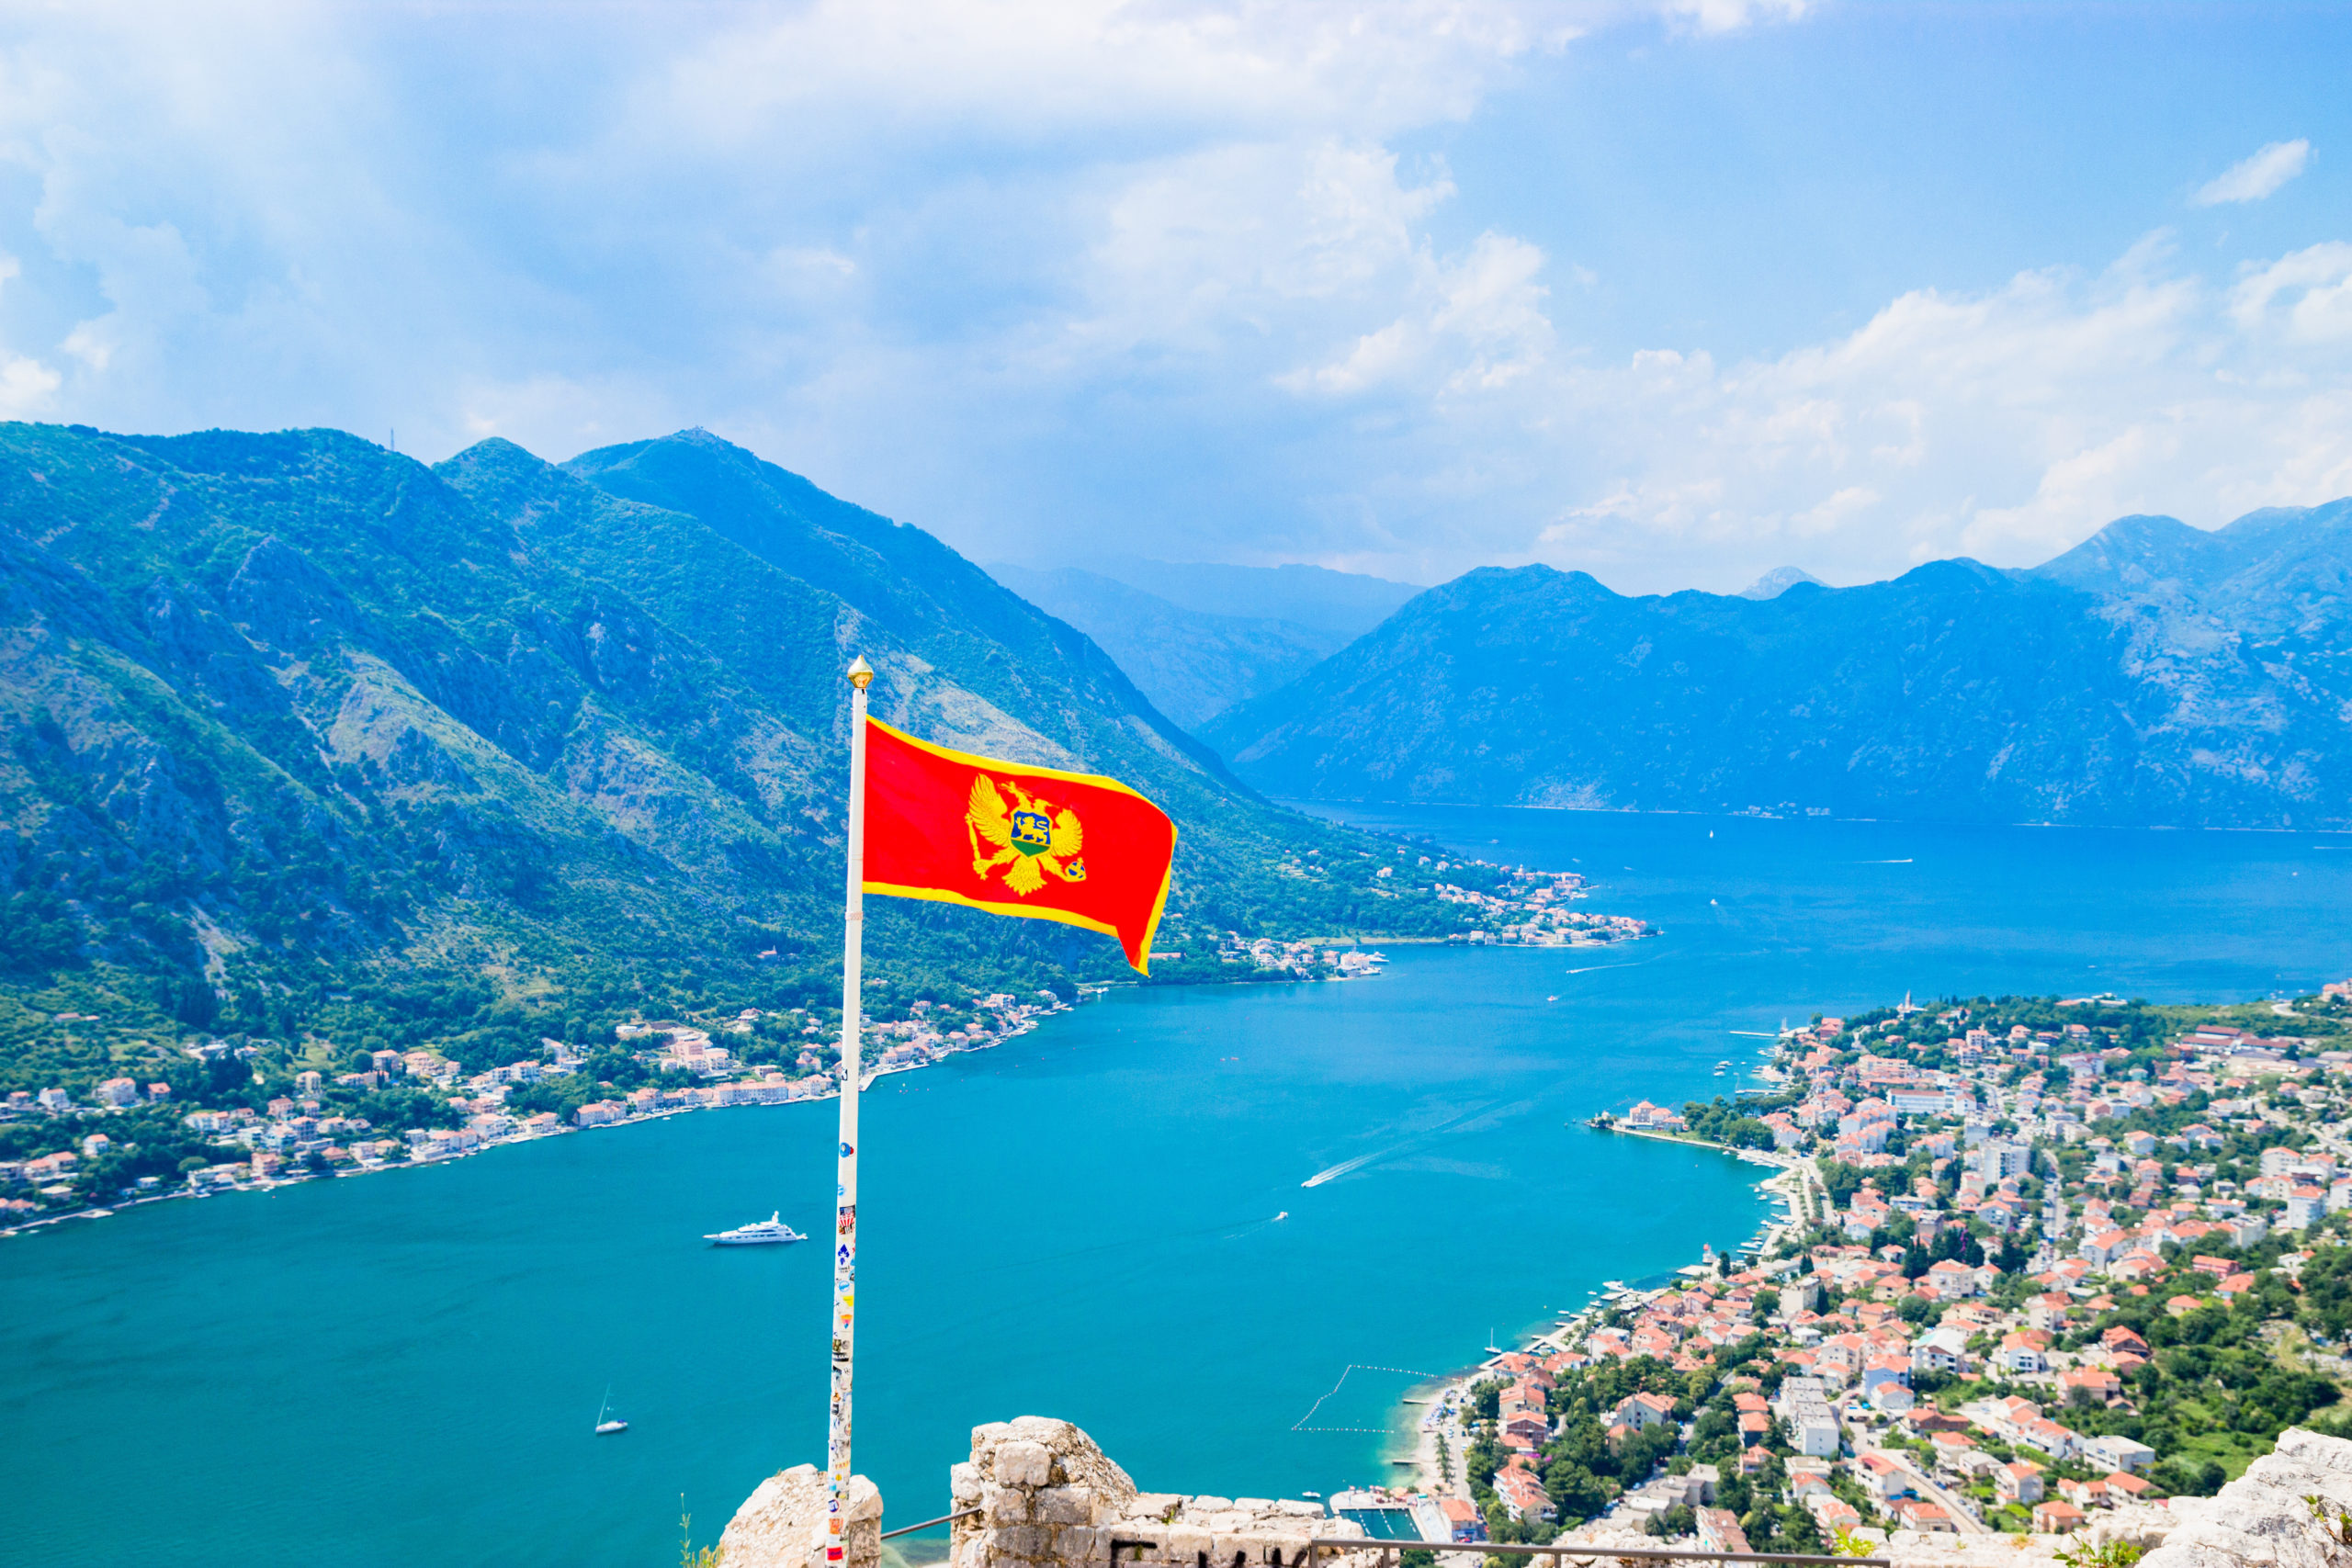 Hanging by a Thread: Russia’s Strategy of Destabilization in Montenegro